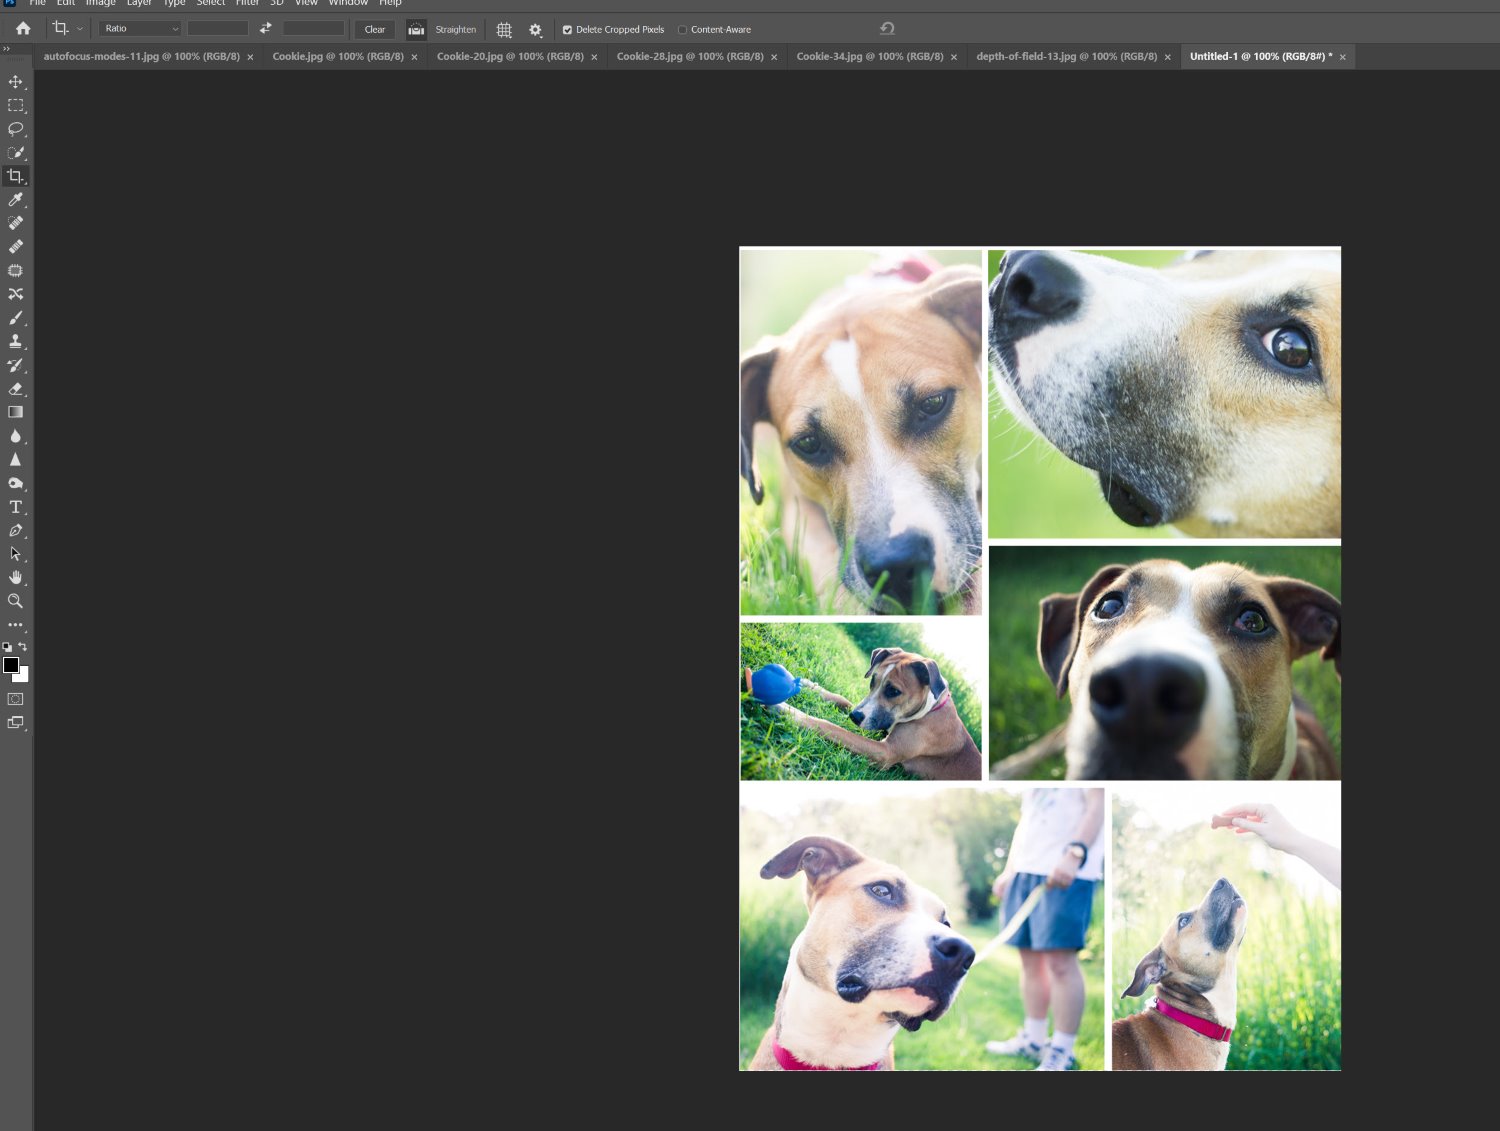 How to Make a Collage in Photoshop 9 Easy Steps!